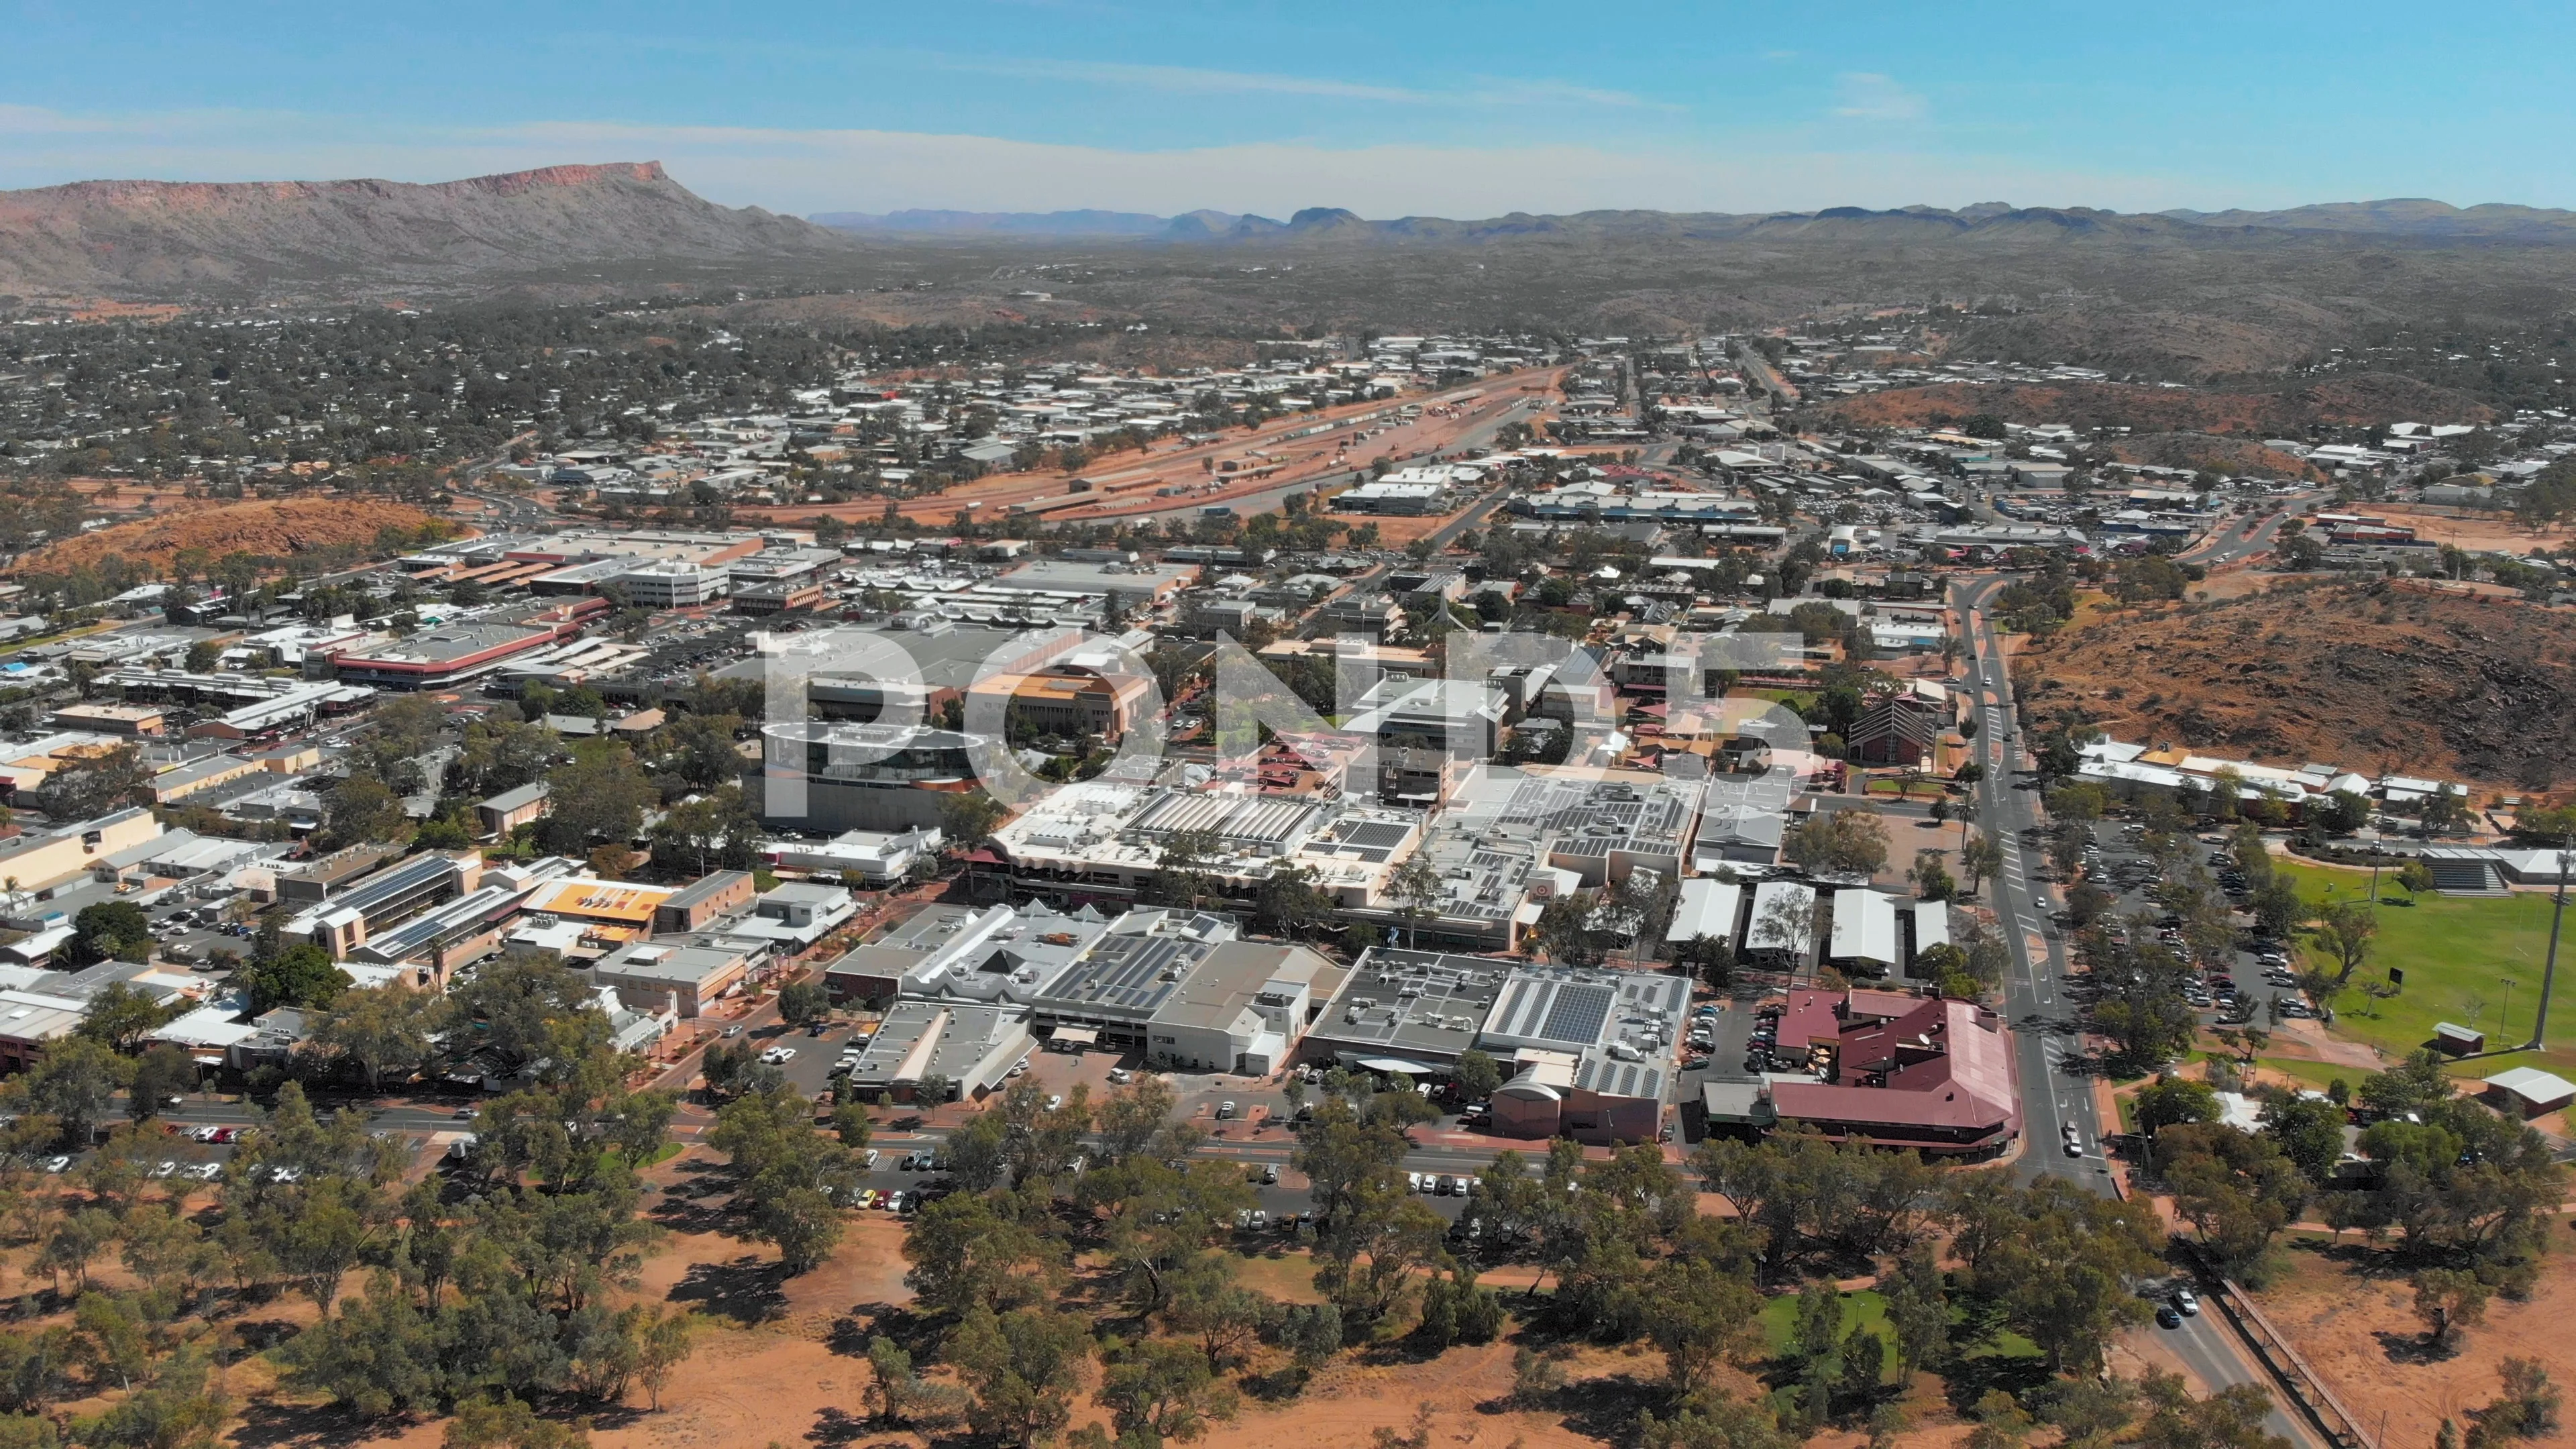 Aerial view of Alice Springs, Australia showcasing its size and layout